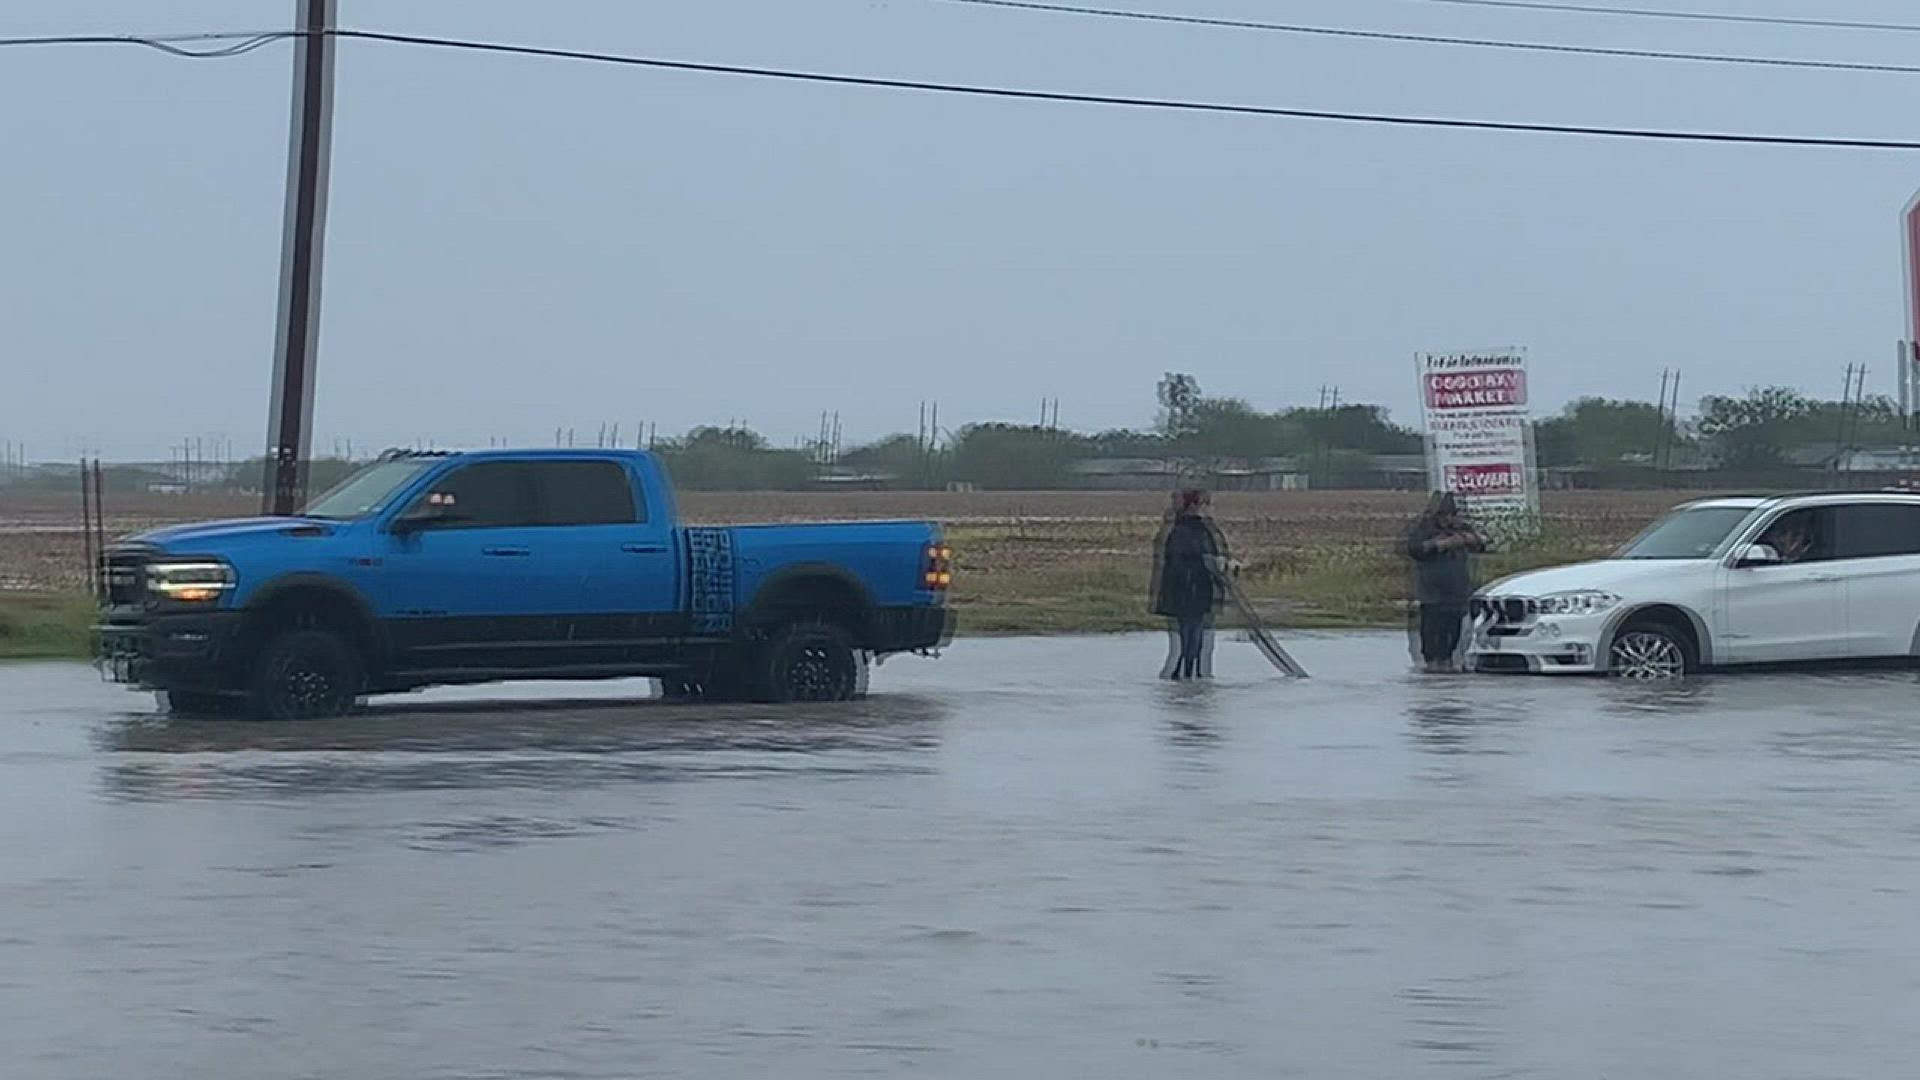 More than a dozen streets in Corpus Christi were nearly impassable Sunday after a tropical disturbance dumped several inches of rain in a short amount of time.